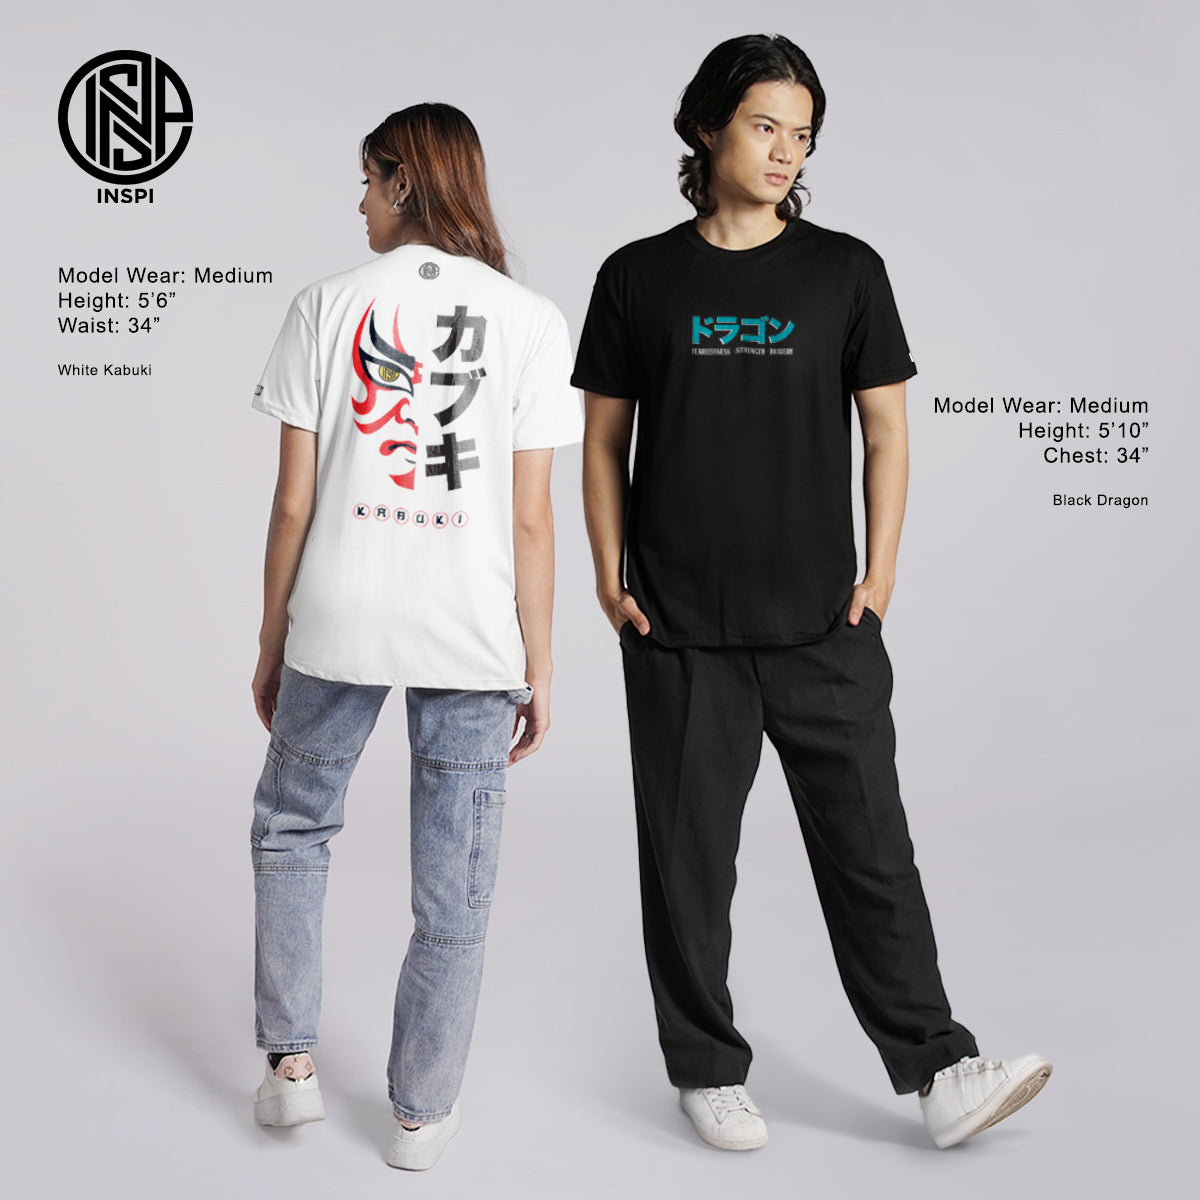 INSPI Minimal Oriental Japanese Ramen T Shirt for Men Trendy Tops for Women Casual Printed Graphic Tee Collection Casual Tshirts